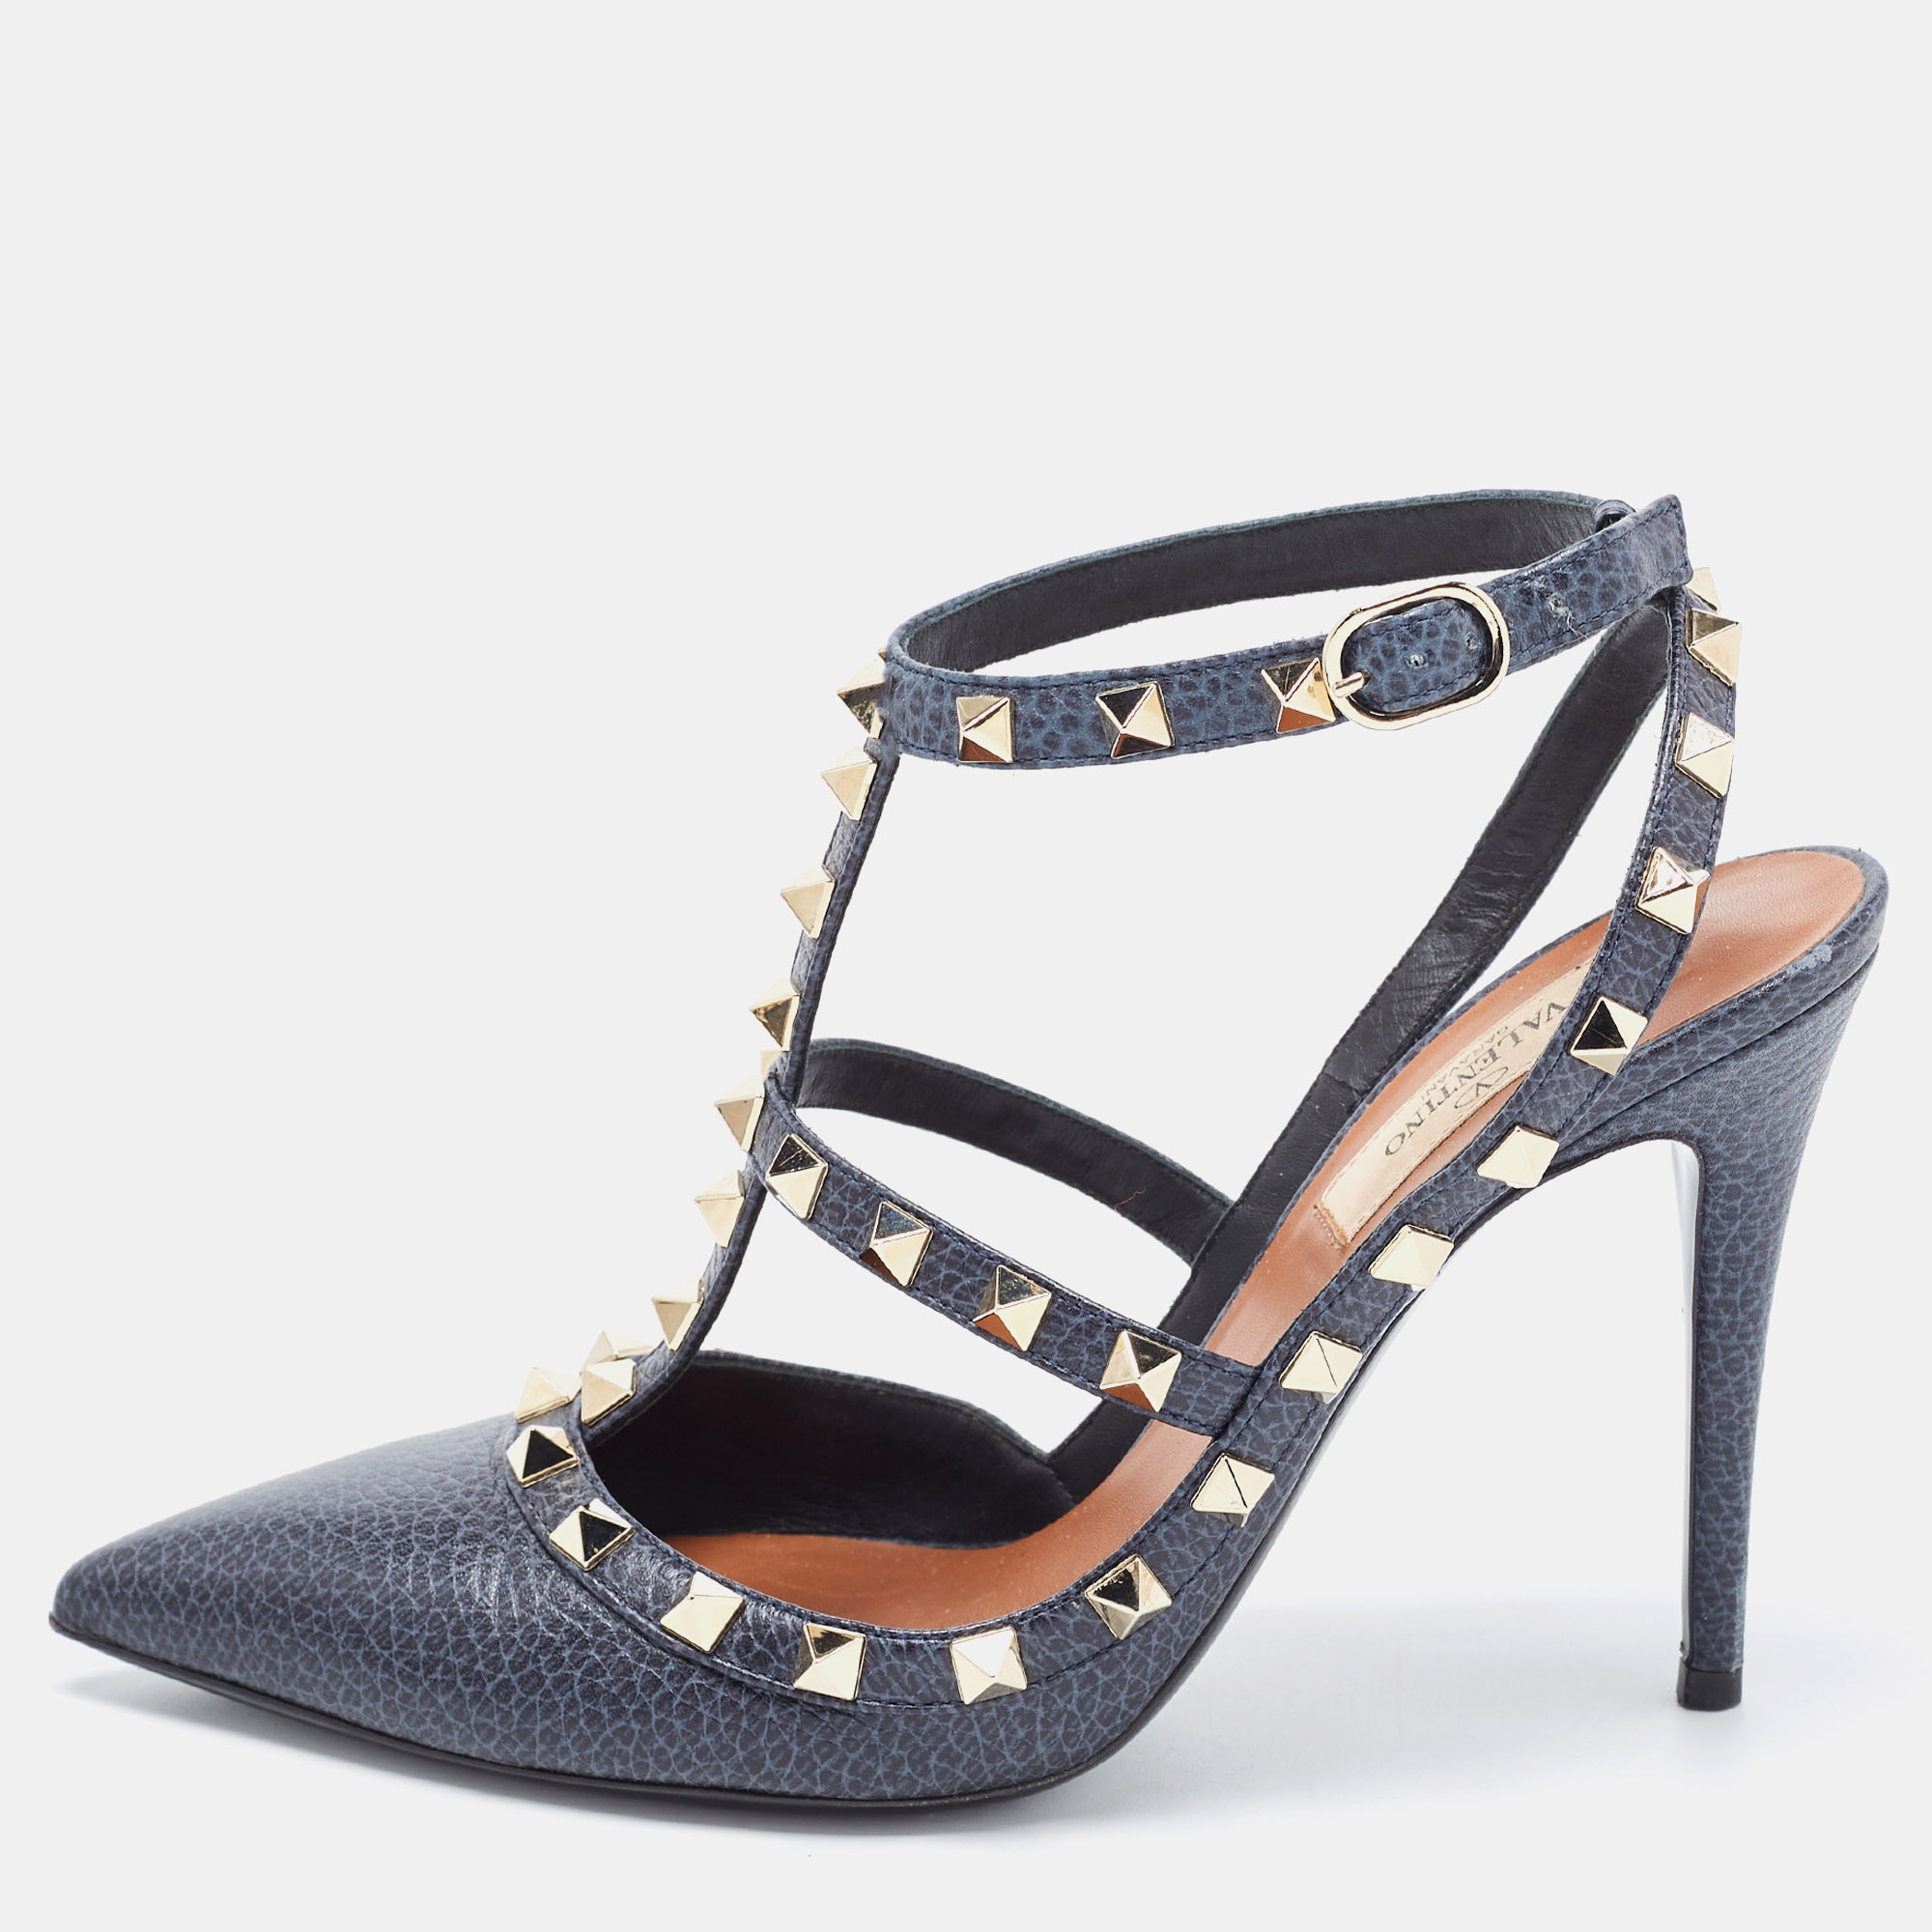 Valentino Two Tone Textured Leather Rockstud Ankle Strap Pumps Size 38